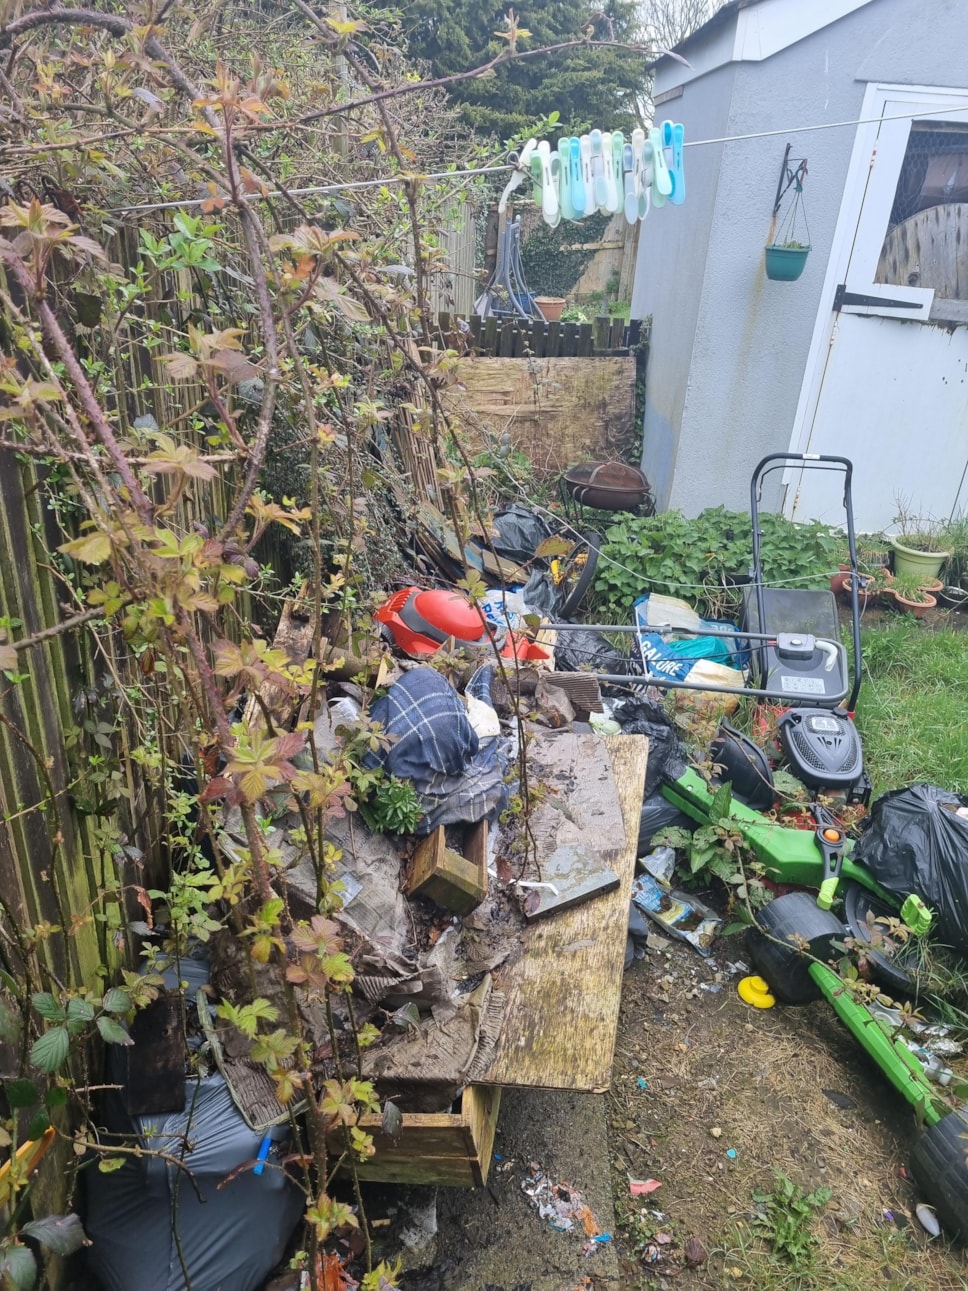 large amount of rubbish in garden